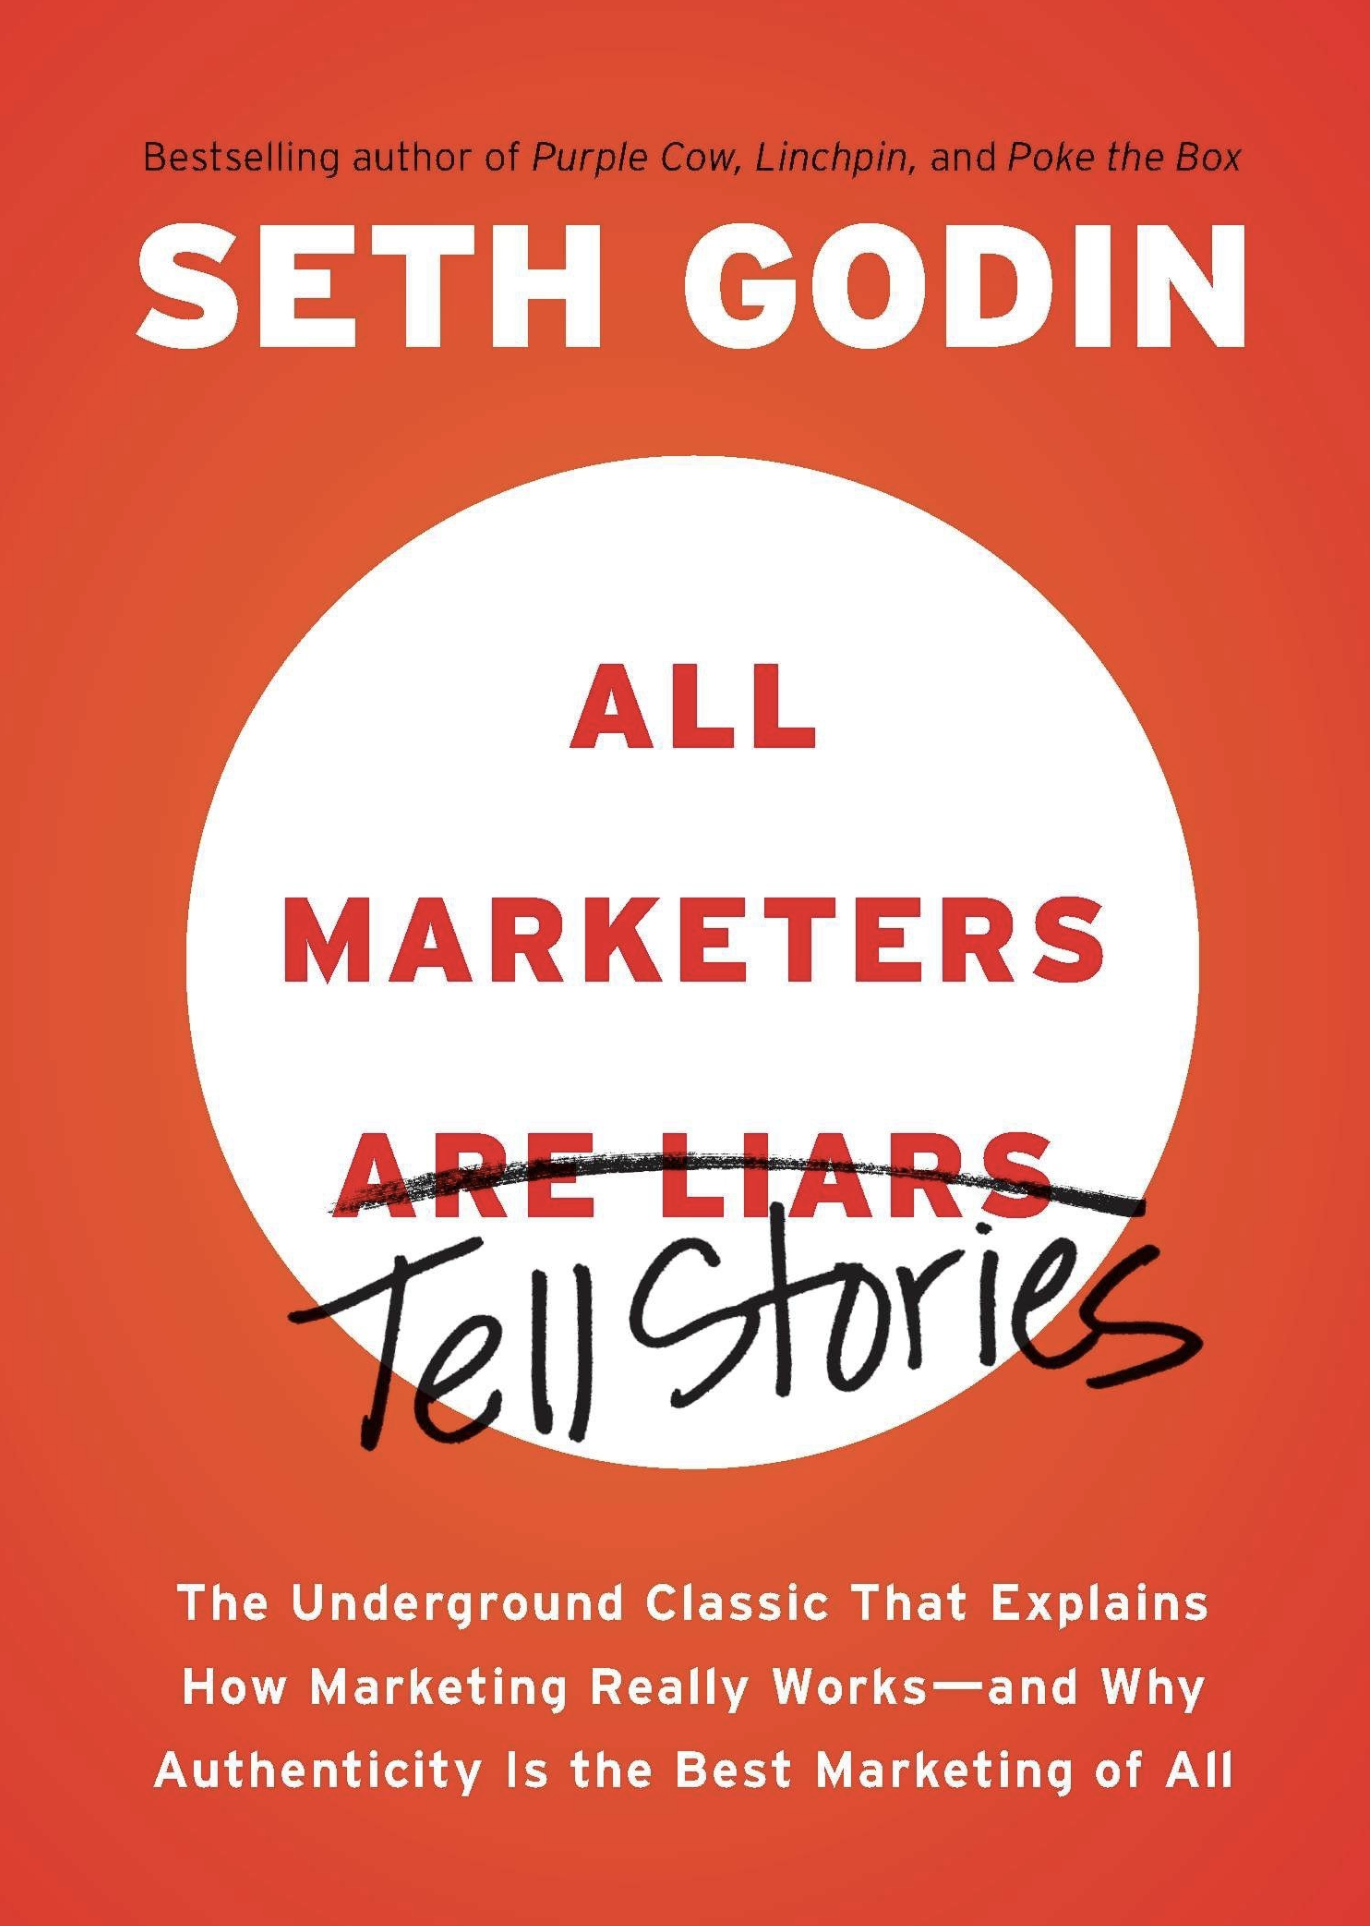 All Marketers Are Liars The Underground Classic That Explains How Marketing Really Works and Why Authenticity Is the Best Marketing of All by Seth Godin